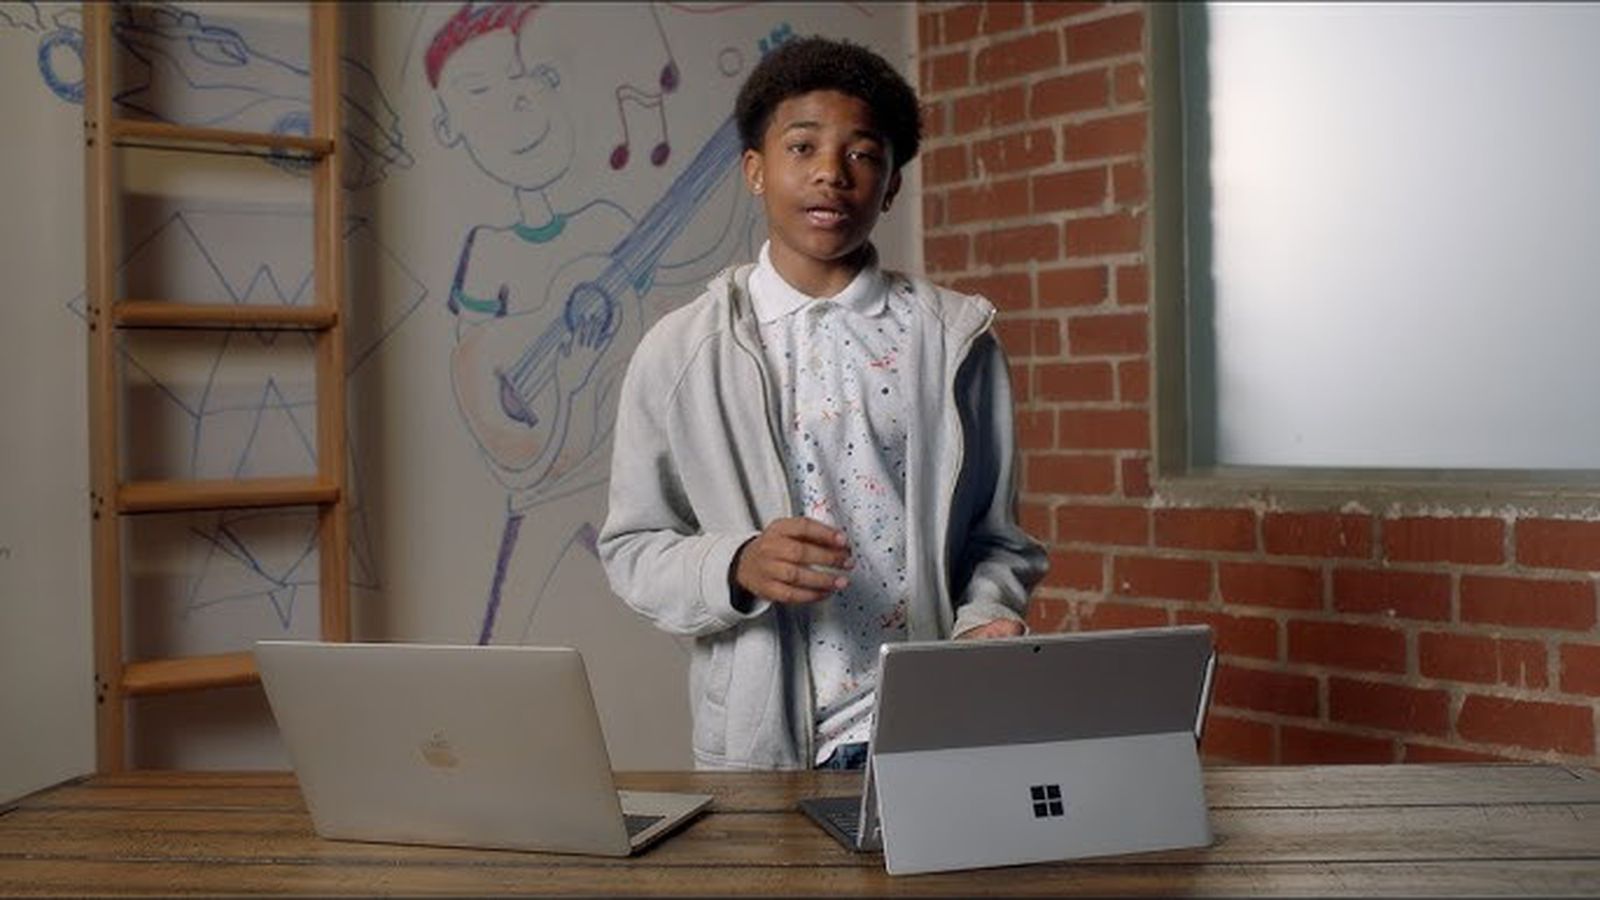 Microsoft announces Surface Pro 7 as ‘the best choice’ over MacBook Pro in new ad